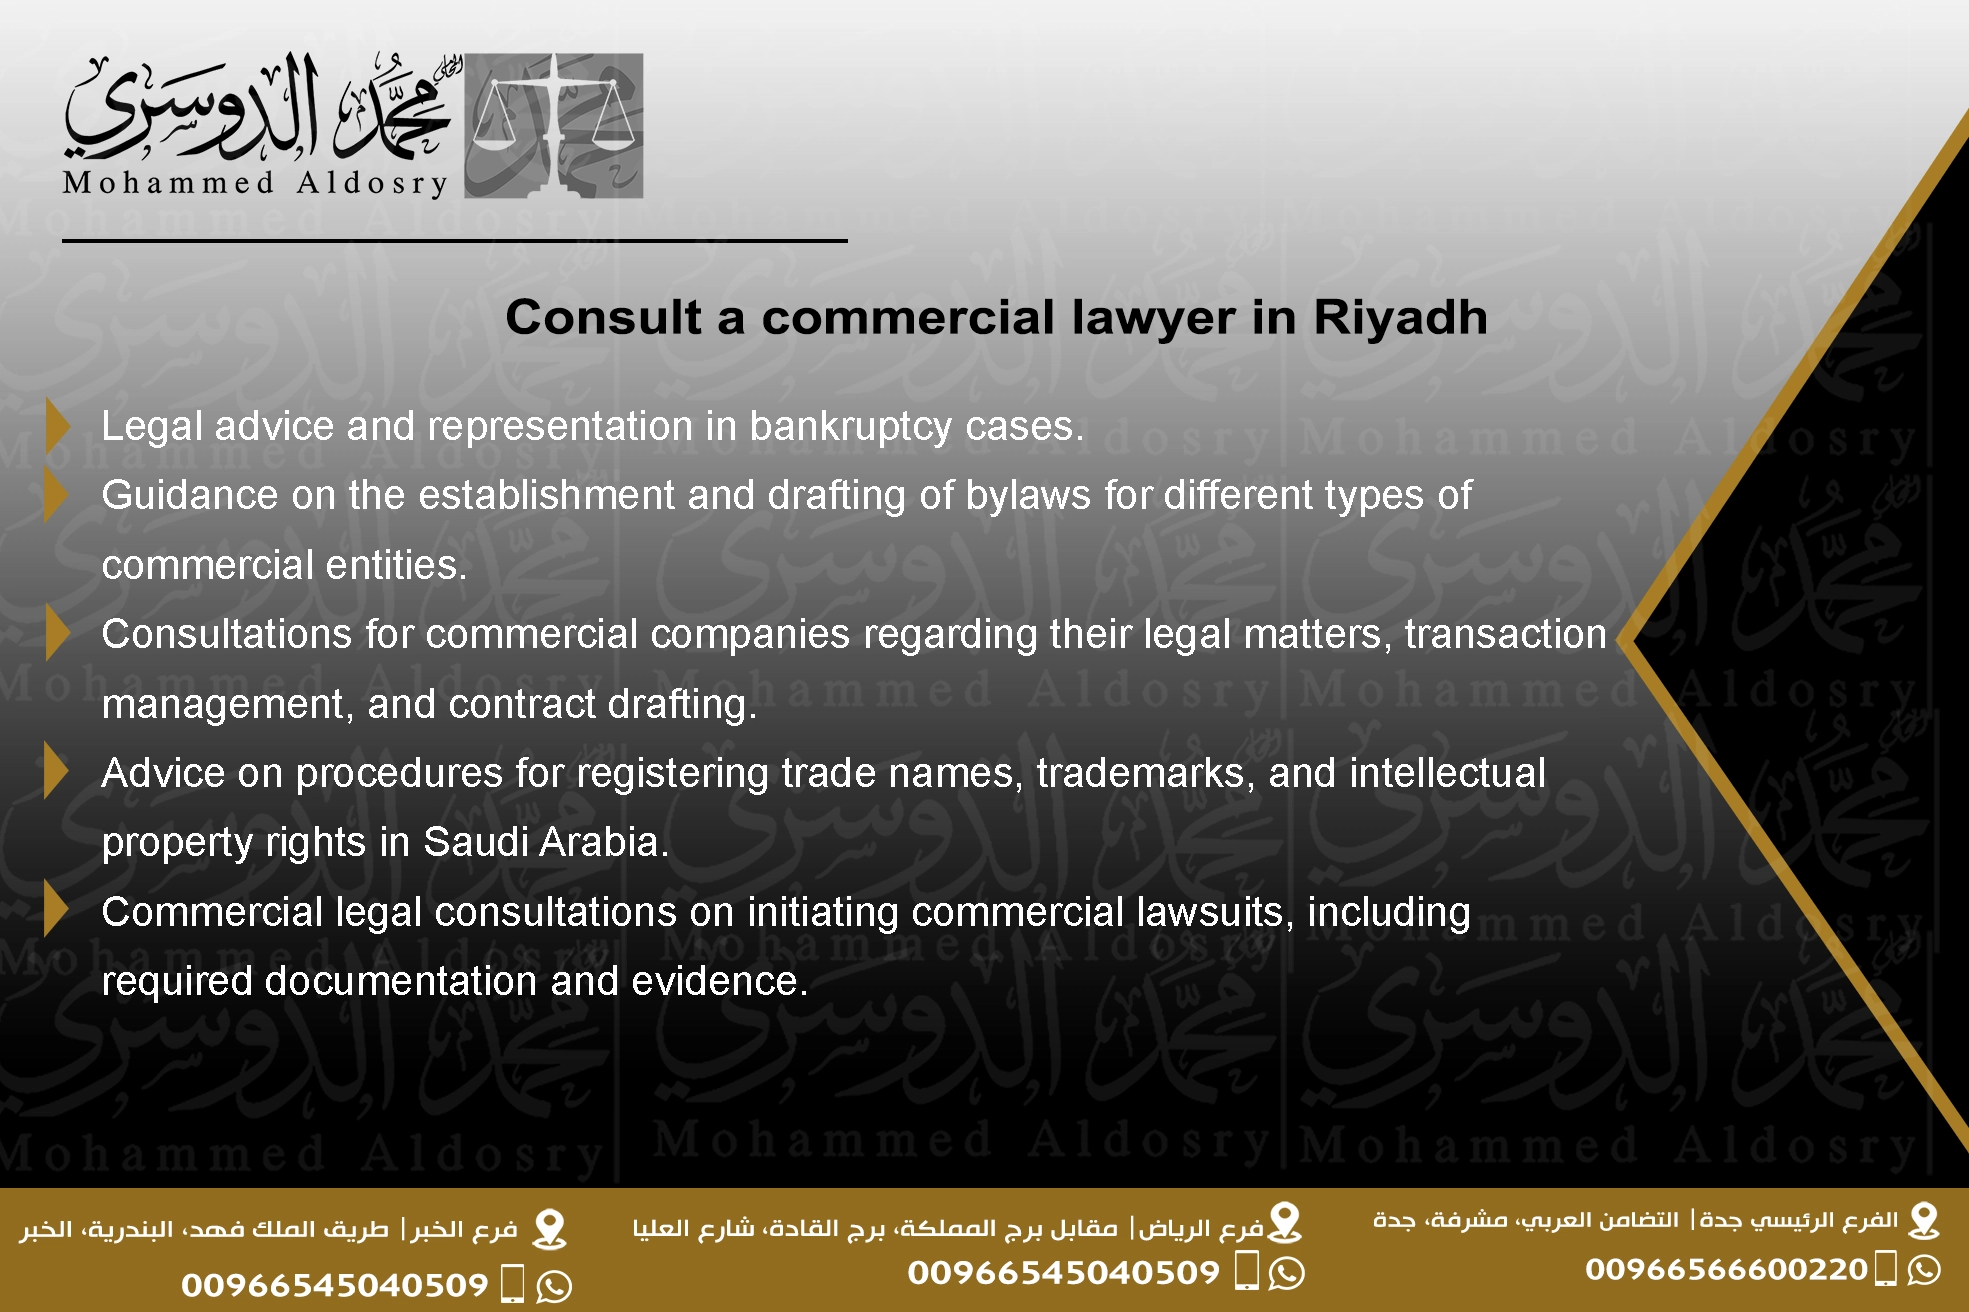 Consult a commercial lawyer in Riyadh